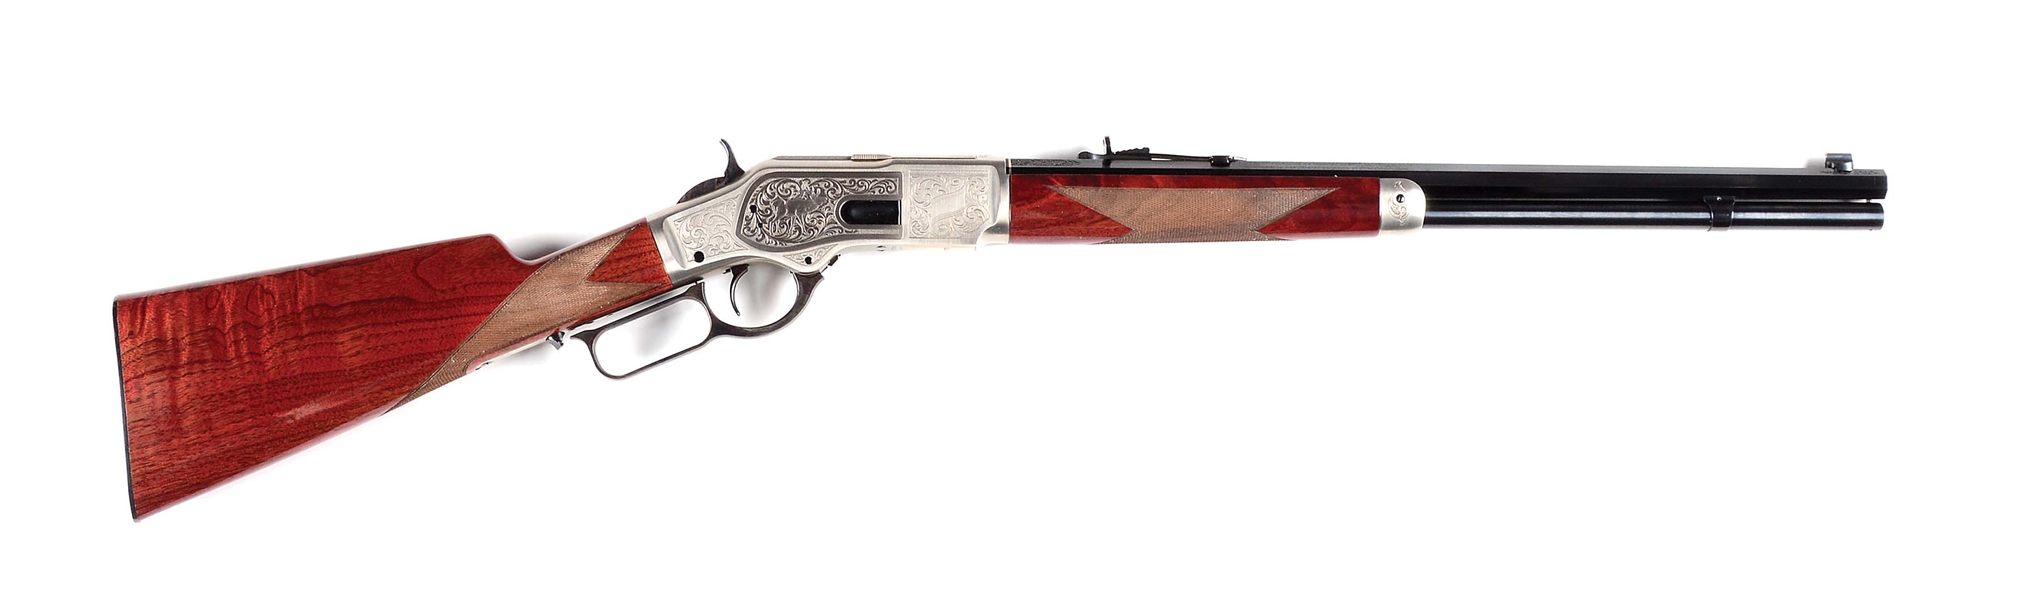 (M)CONSECUTIVE SERIAL NUMBER 1OF 25 WINCHESTER MODEL 1873 SHORT RIFLE ONE OF ONE THOUSAND MADE FOR CDNN SPORTS. 